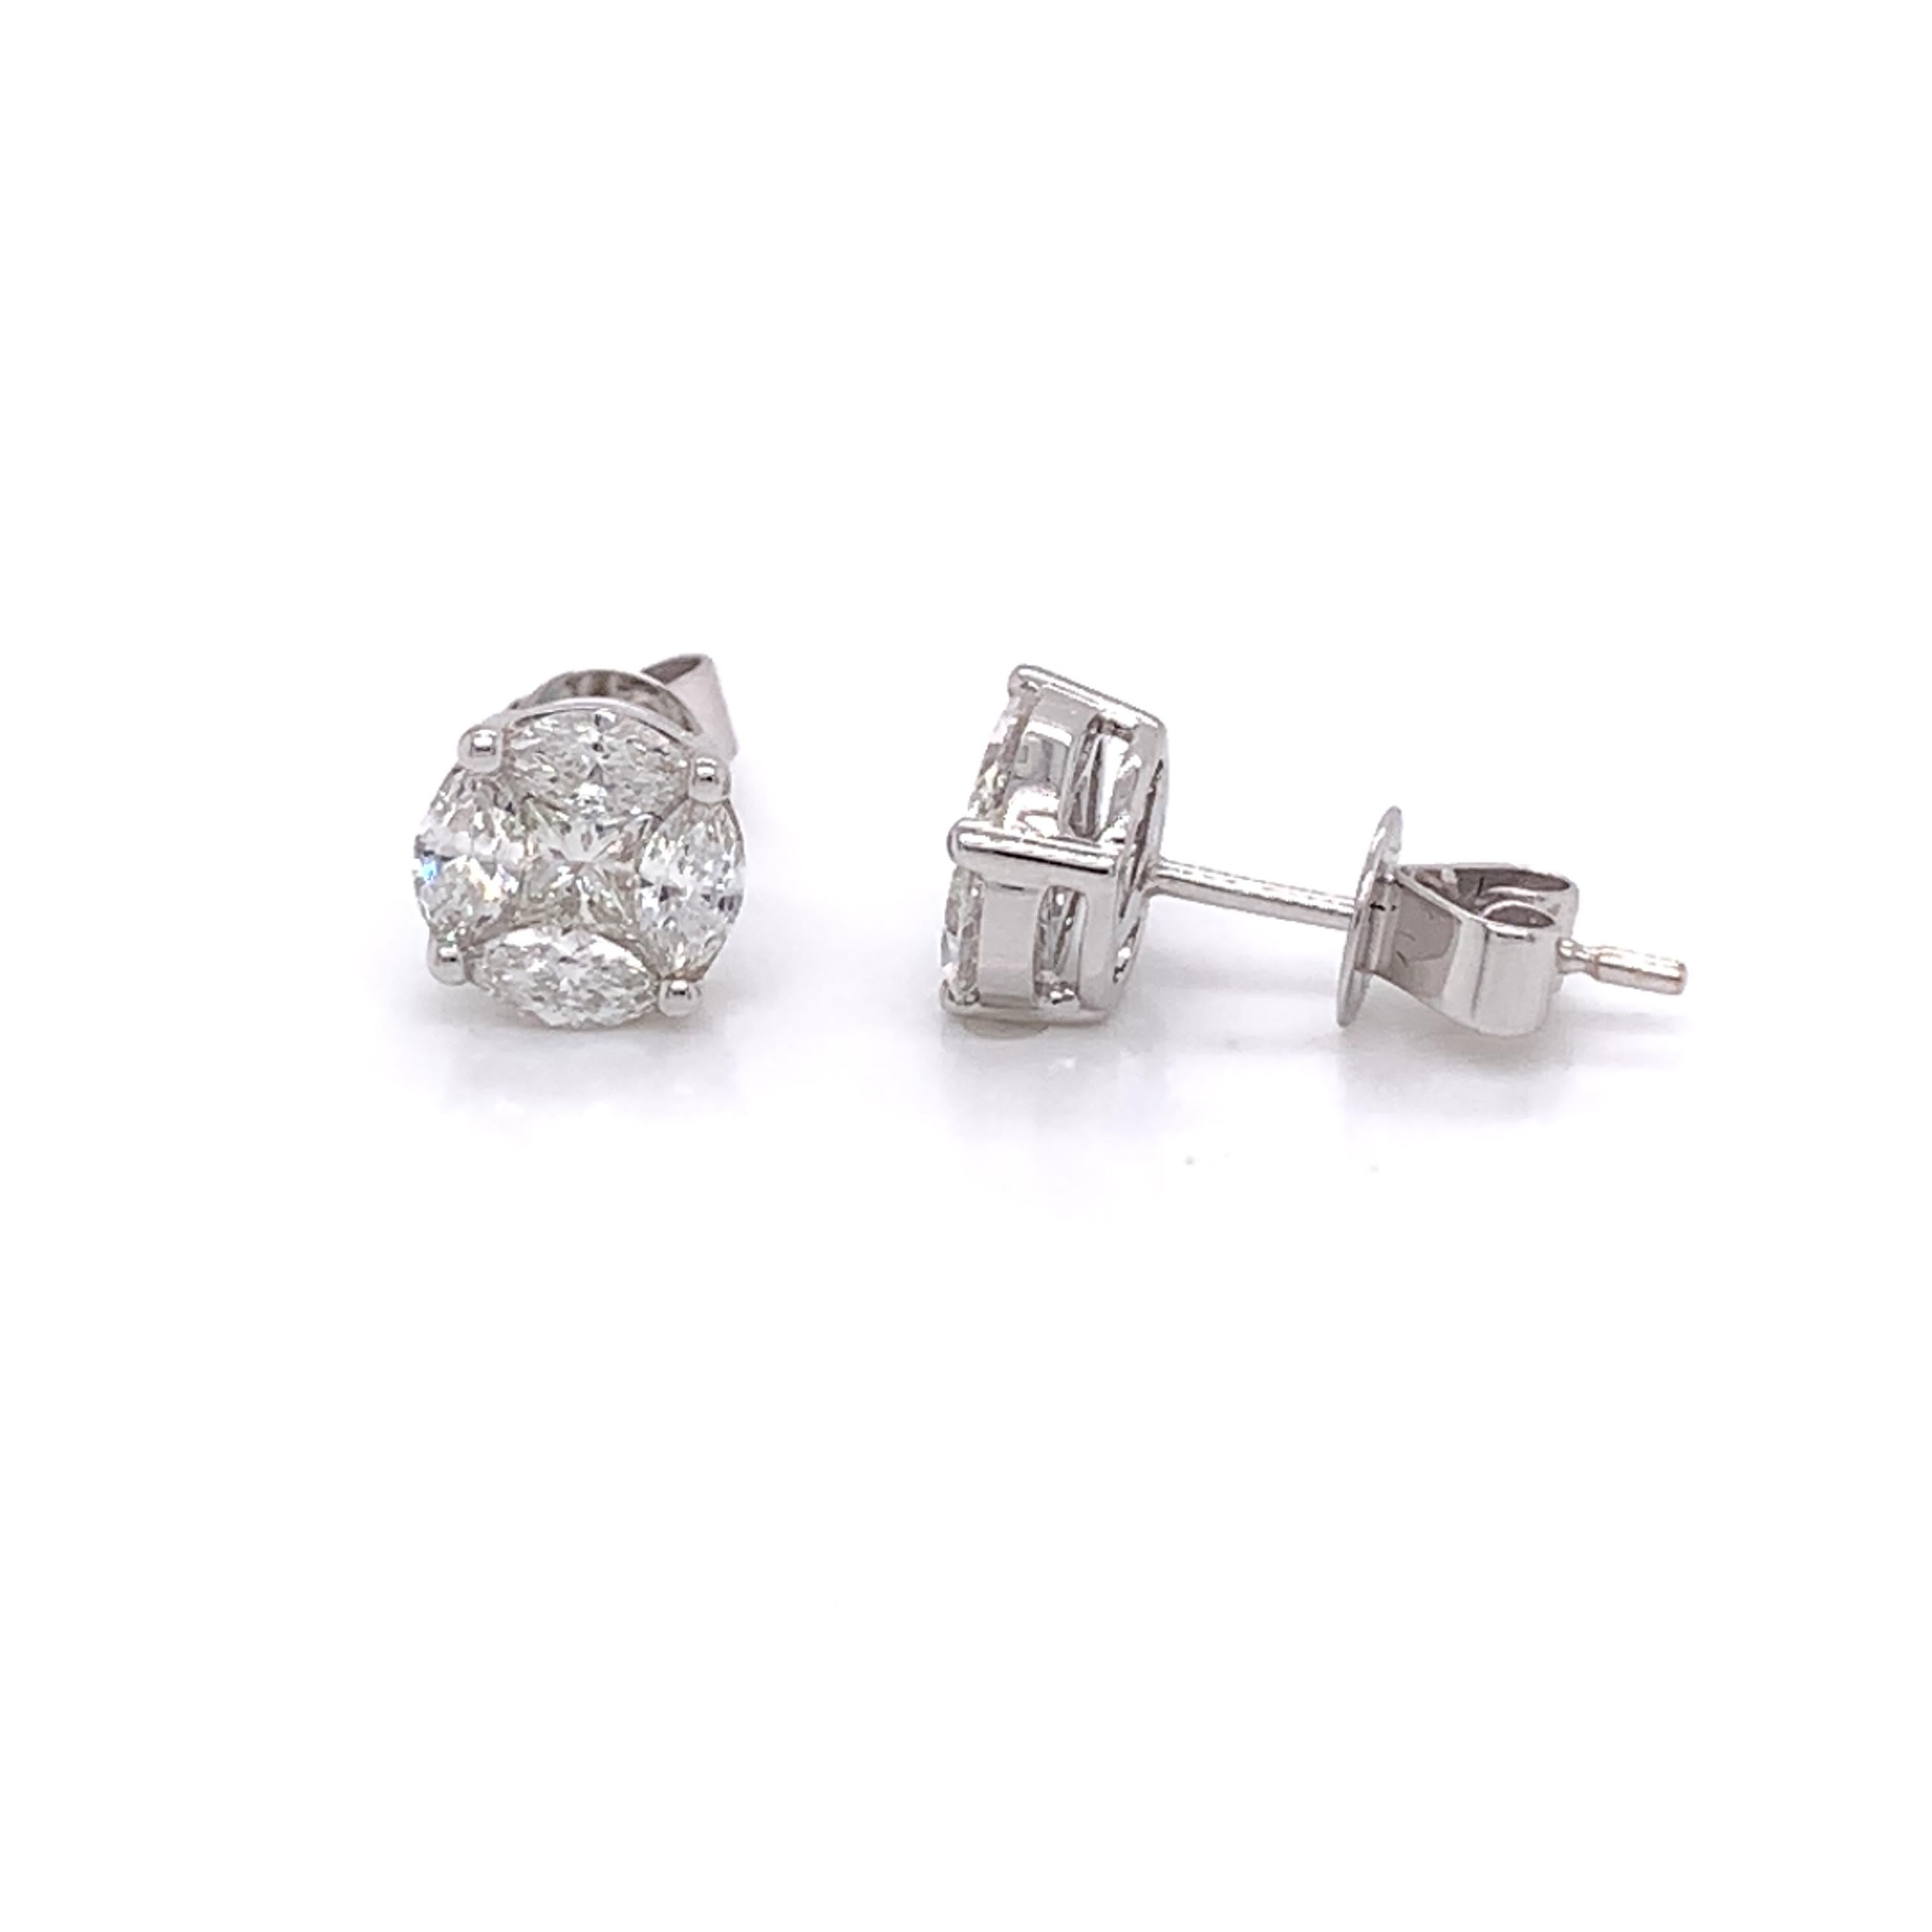 Diamond Studs made with real/natural marquis/princess cut diamonds. Total Diamond Weight: 0.72 carats. Diamond Quantity: 10 diamonds (8 marquis cut diamonds + 2 princess cut diamonds). Color: G-H. Clarity. VS-SI. Mounted on 18kt white gold pushback